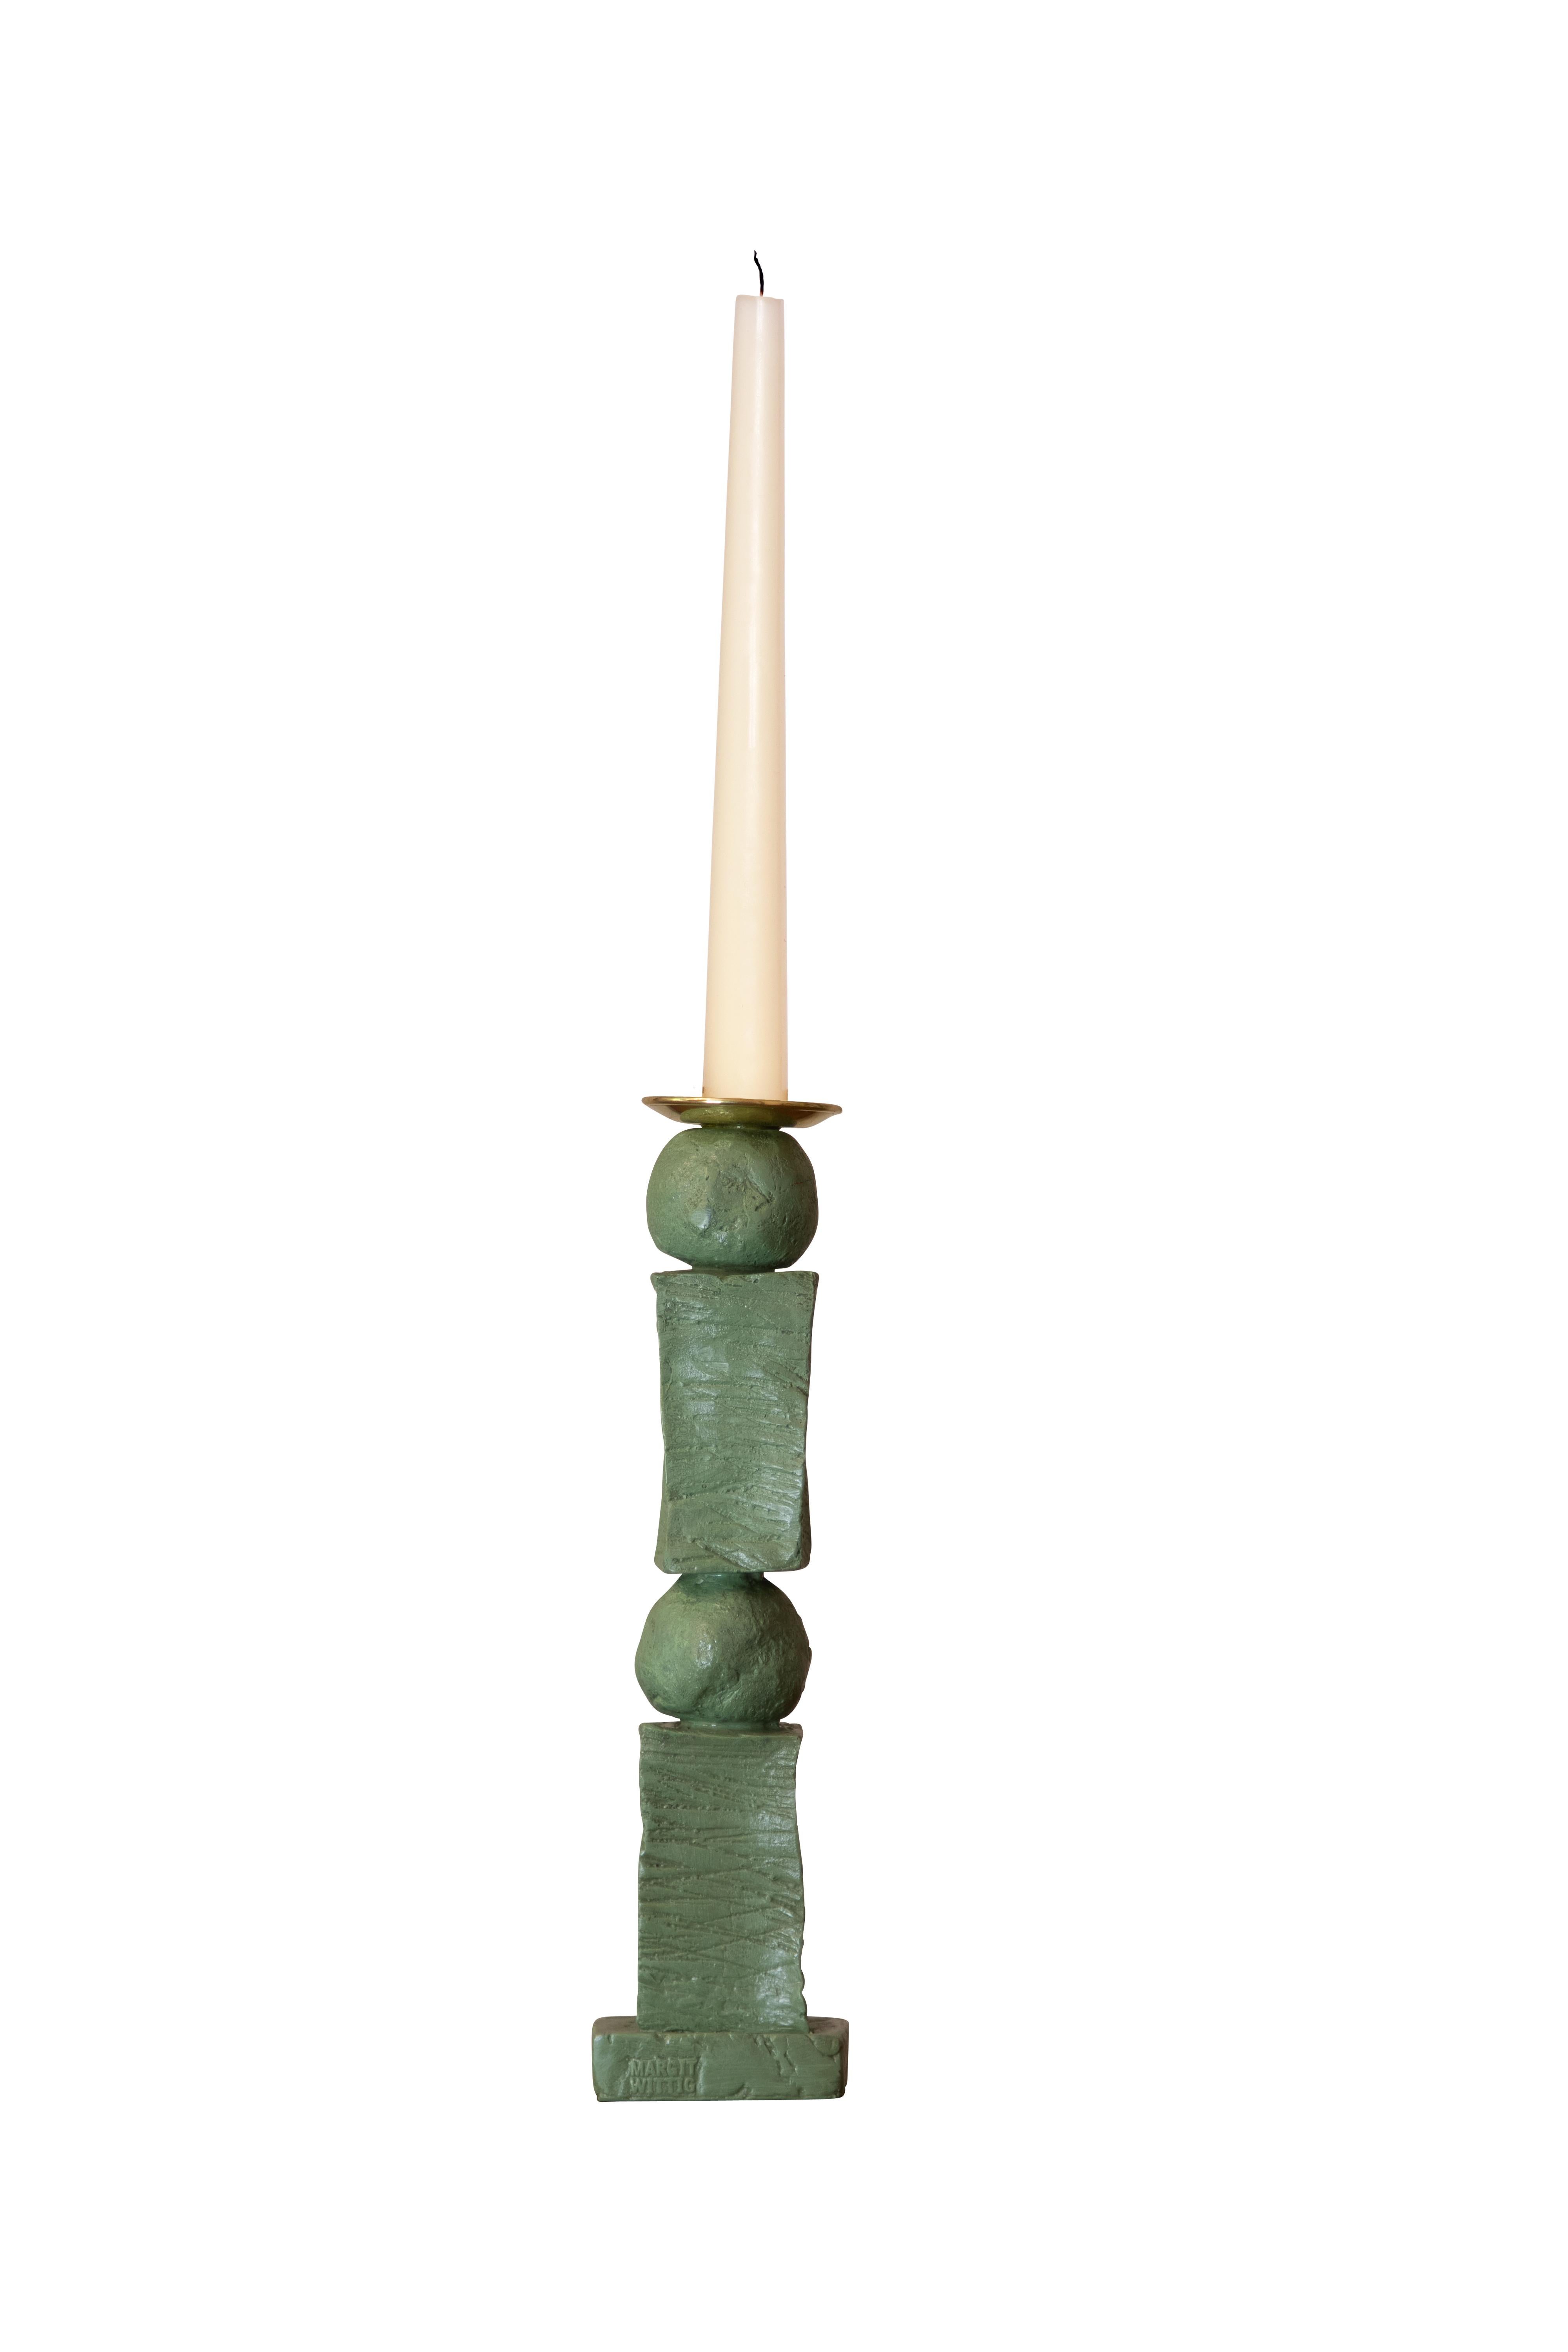 

Margit Wittig has used her sculptural skills to create beautifully-crafted, well-proportioned candlesticks, which are compositions of her unique signature pearl and block shaped designs.

Each candlestick begins as hand-sculpted components which